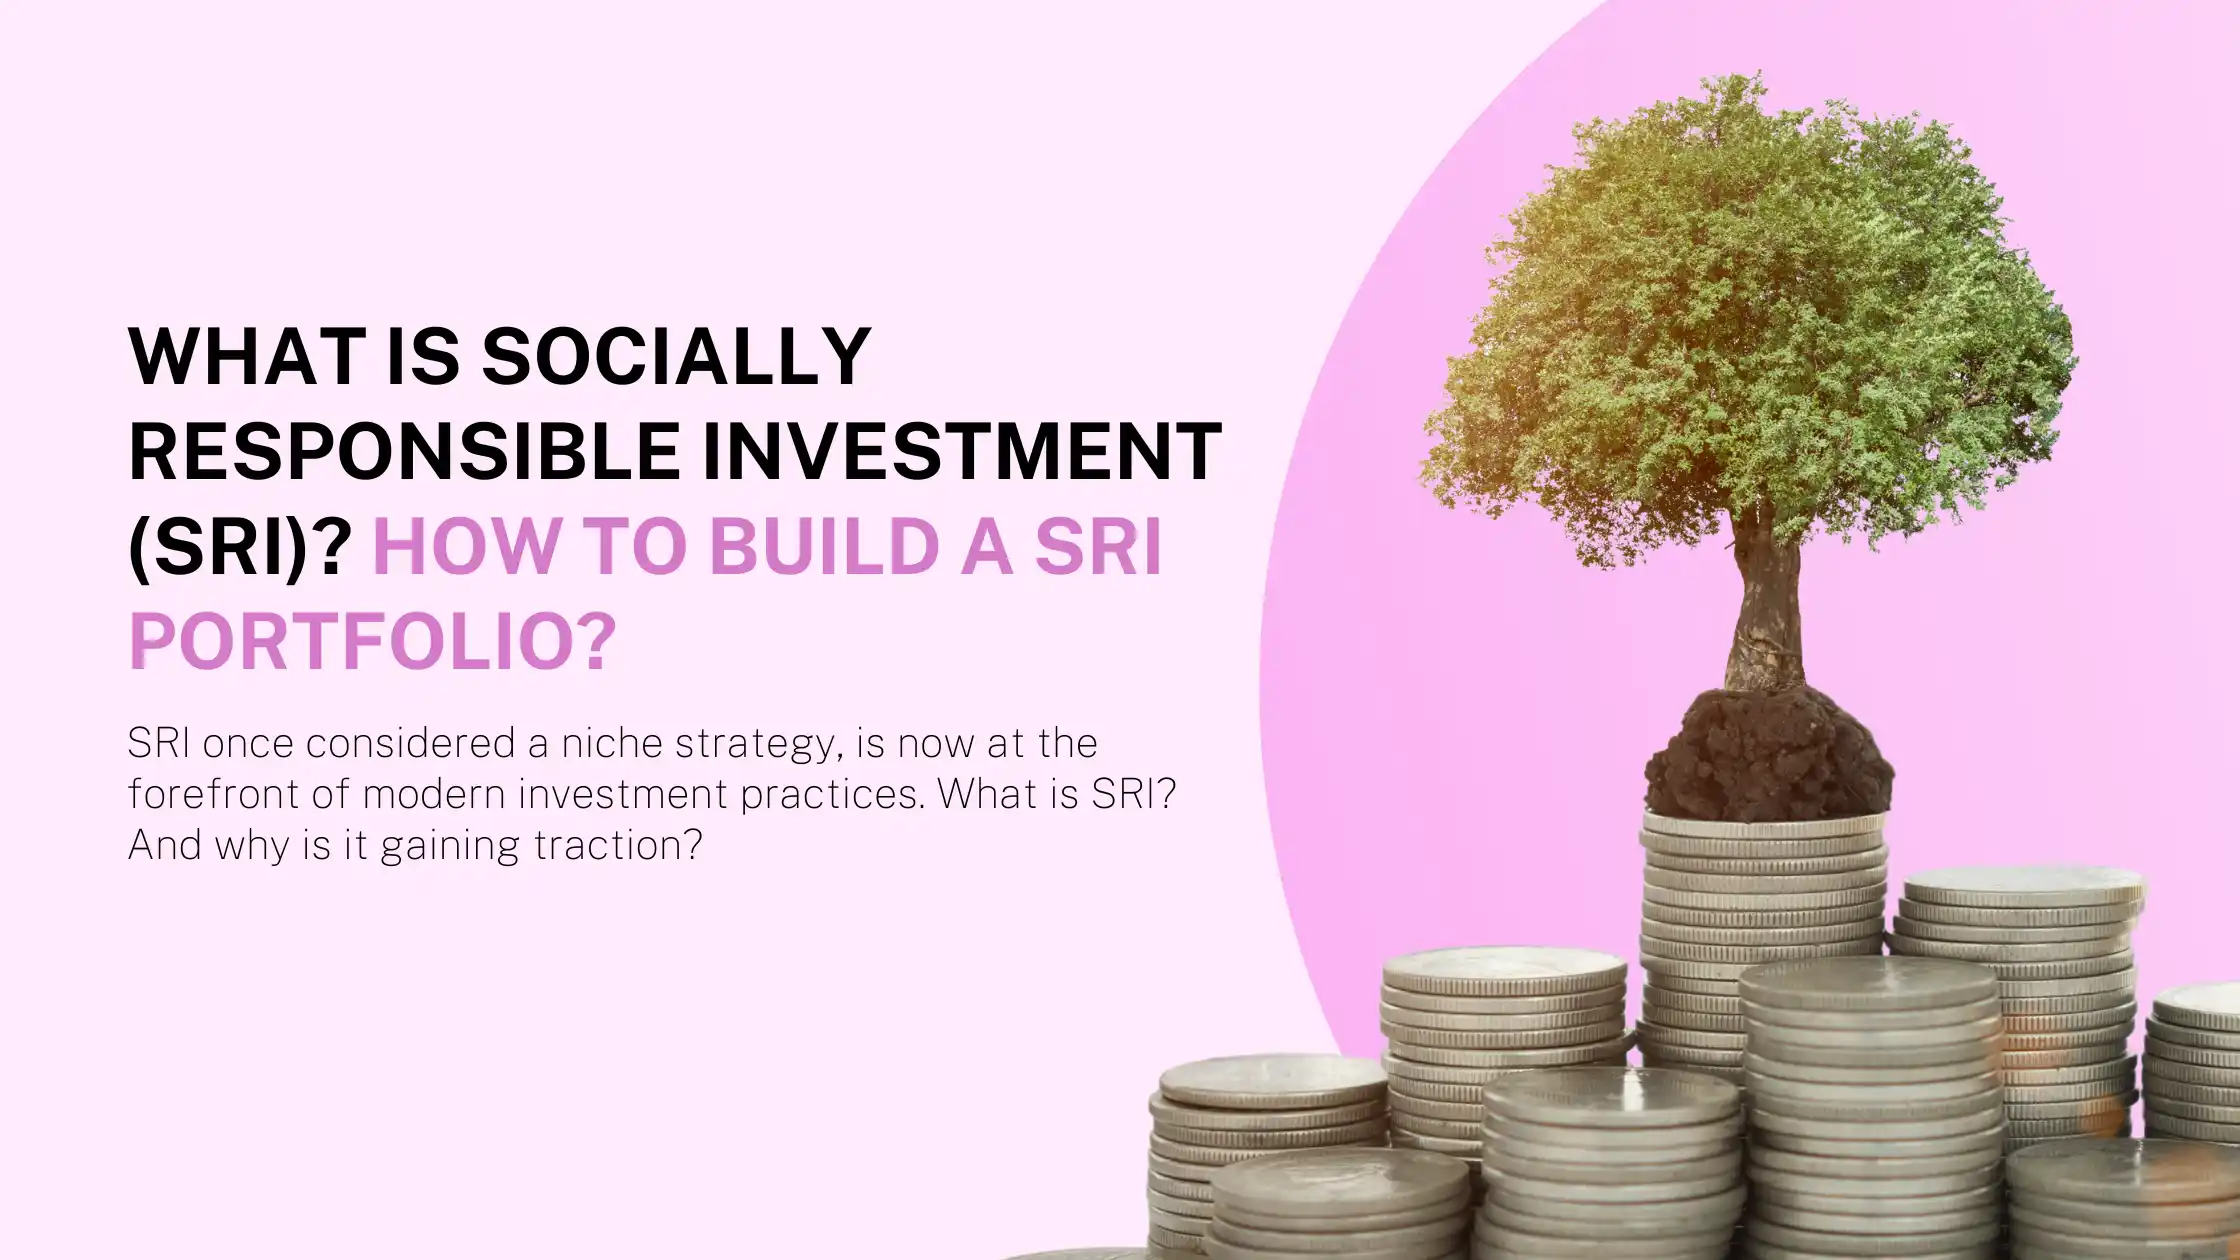 What is socially responsible investment (SRI)? How to build a SRI portfolio?